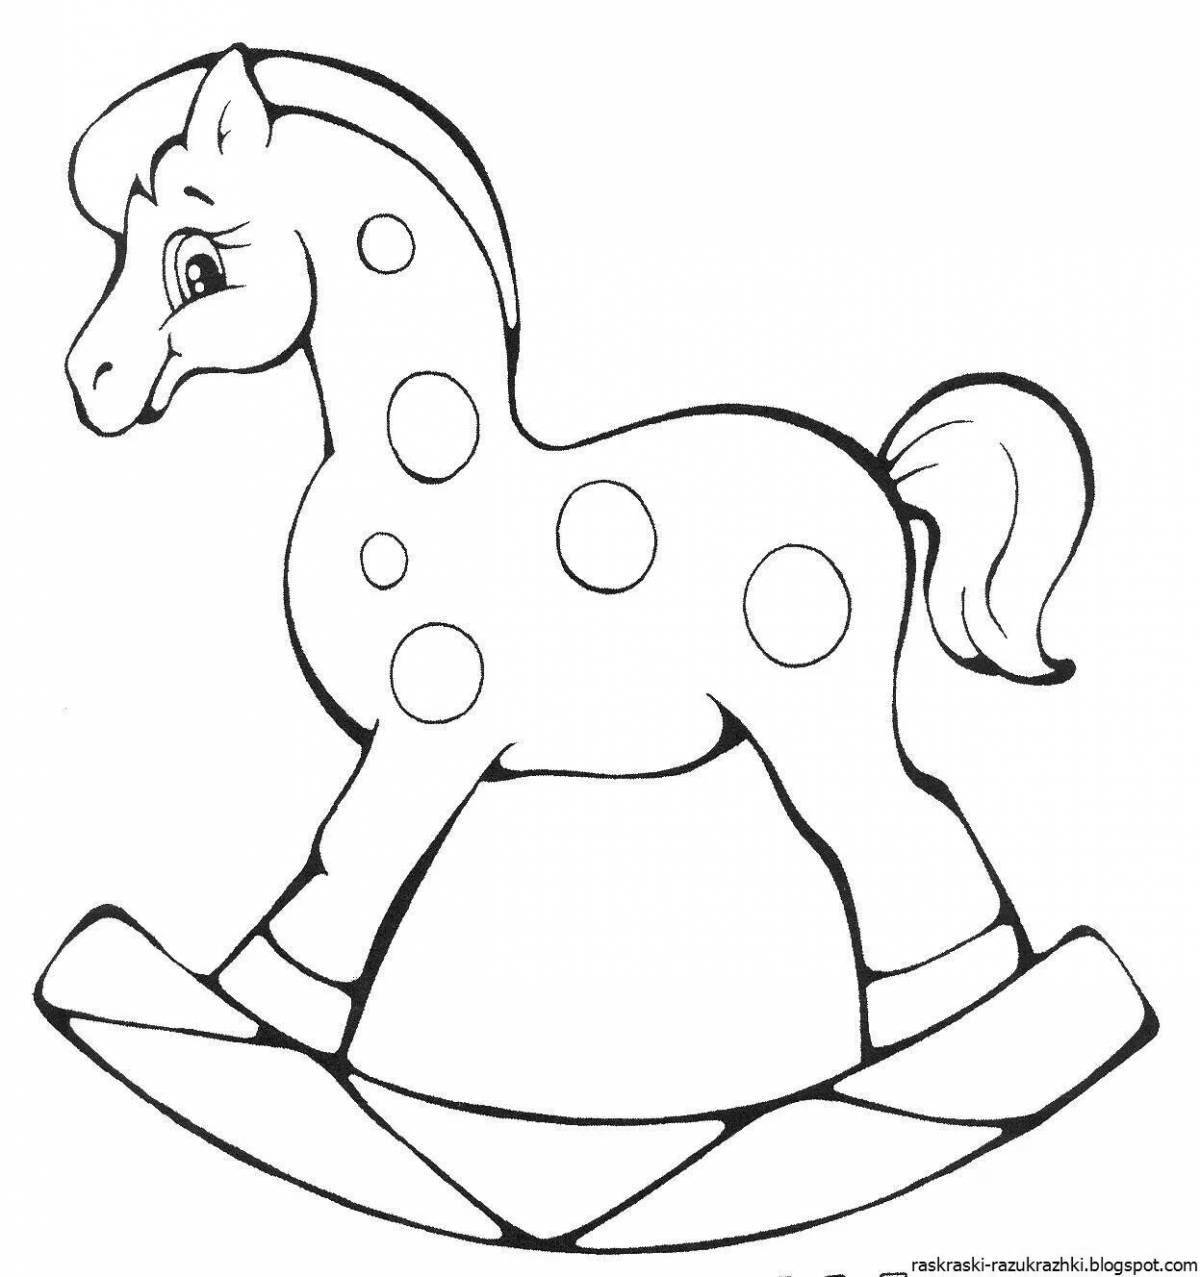 Creative horse drawing for kids